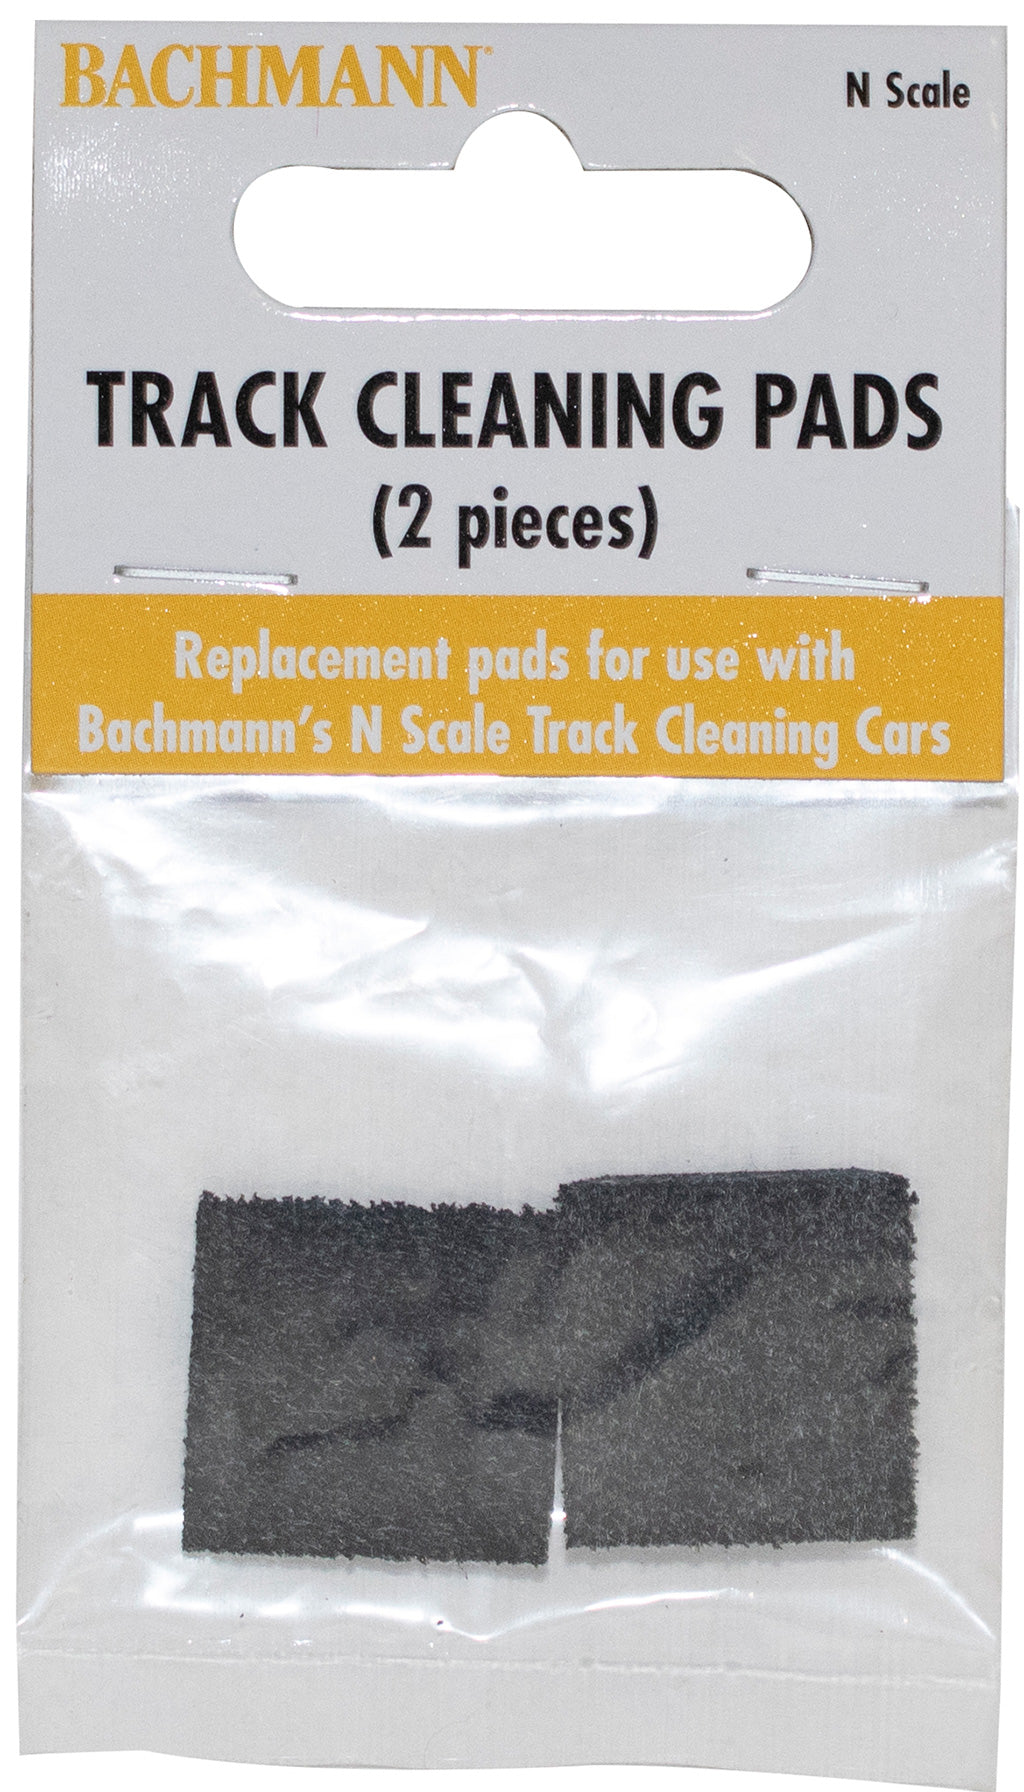 Bachmann 16999 N Scale Track Cleaning Pads (2pcs)